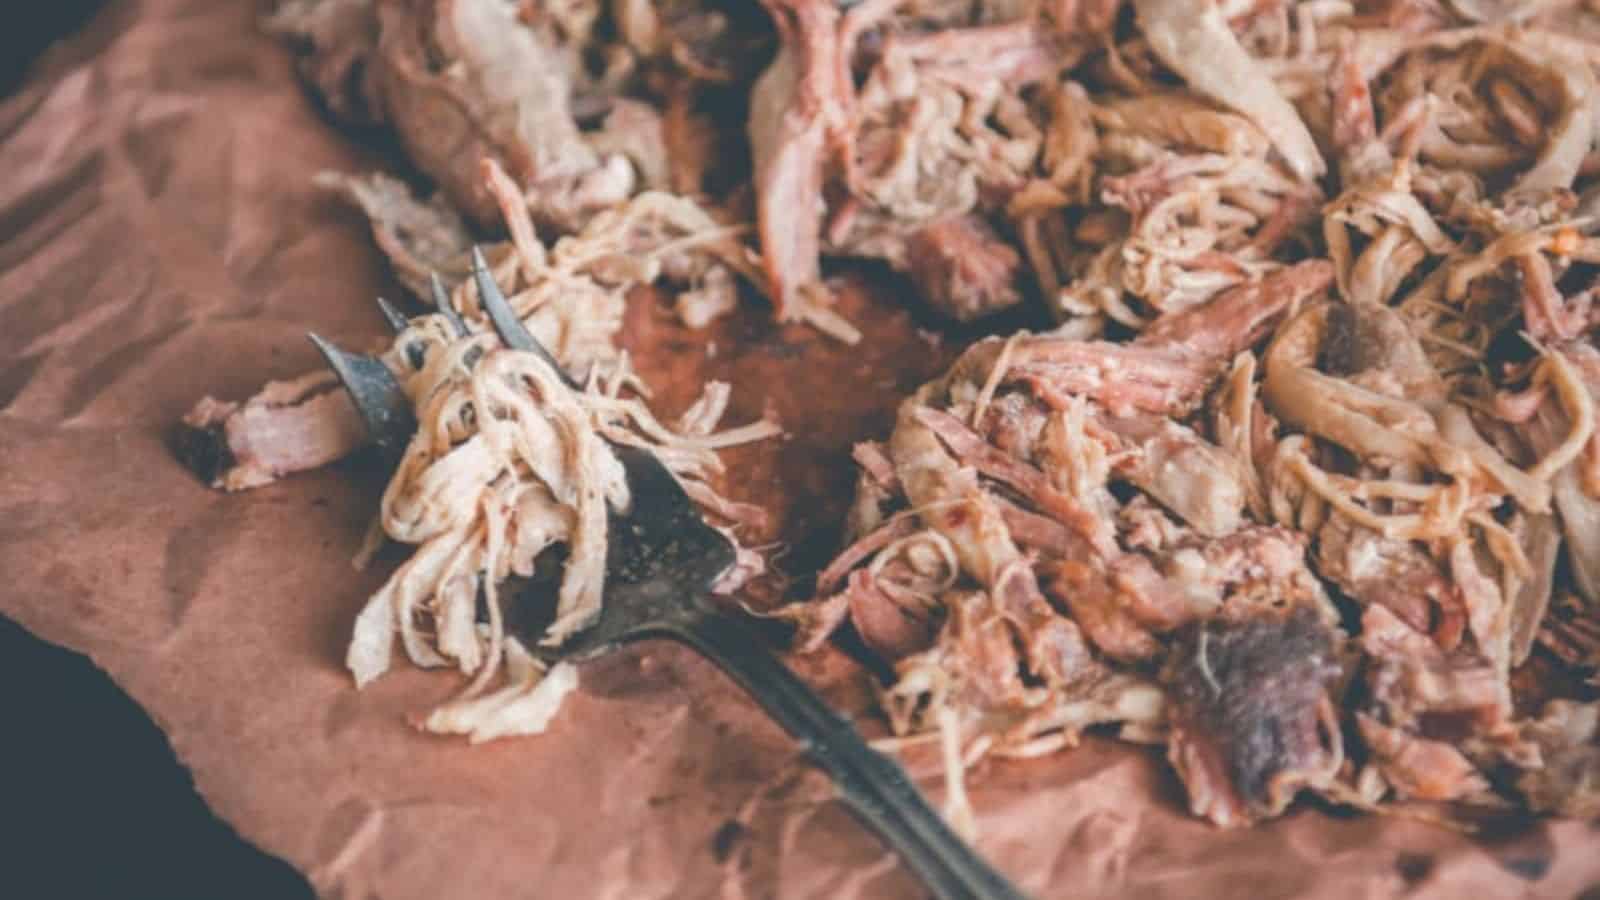 Shredded pulled pork butt with a fork.